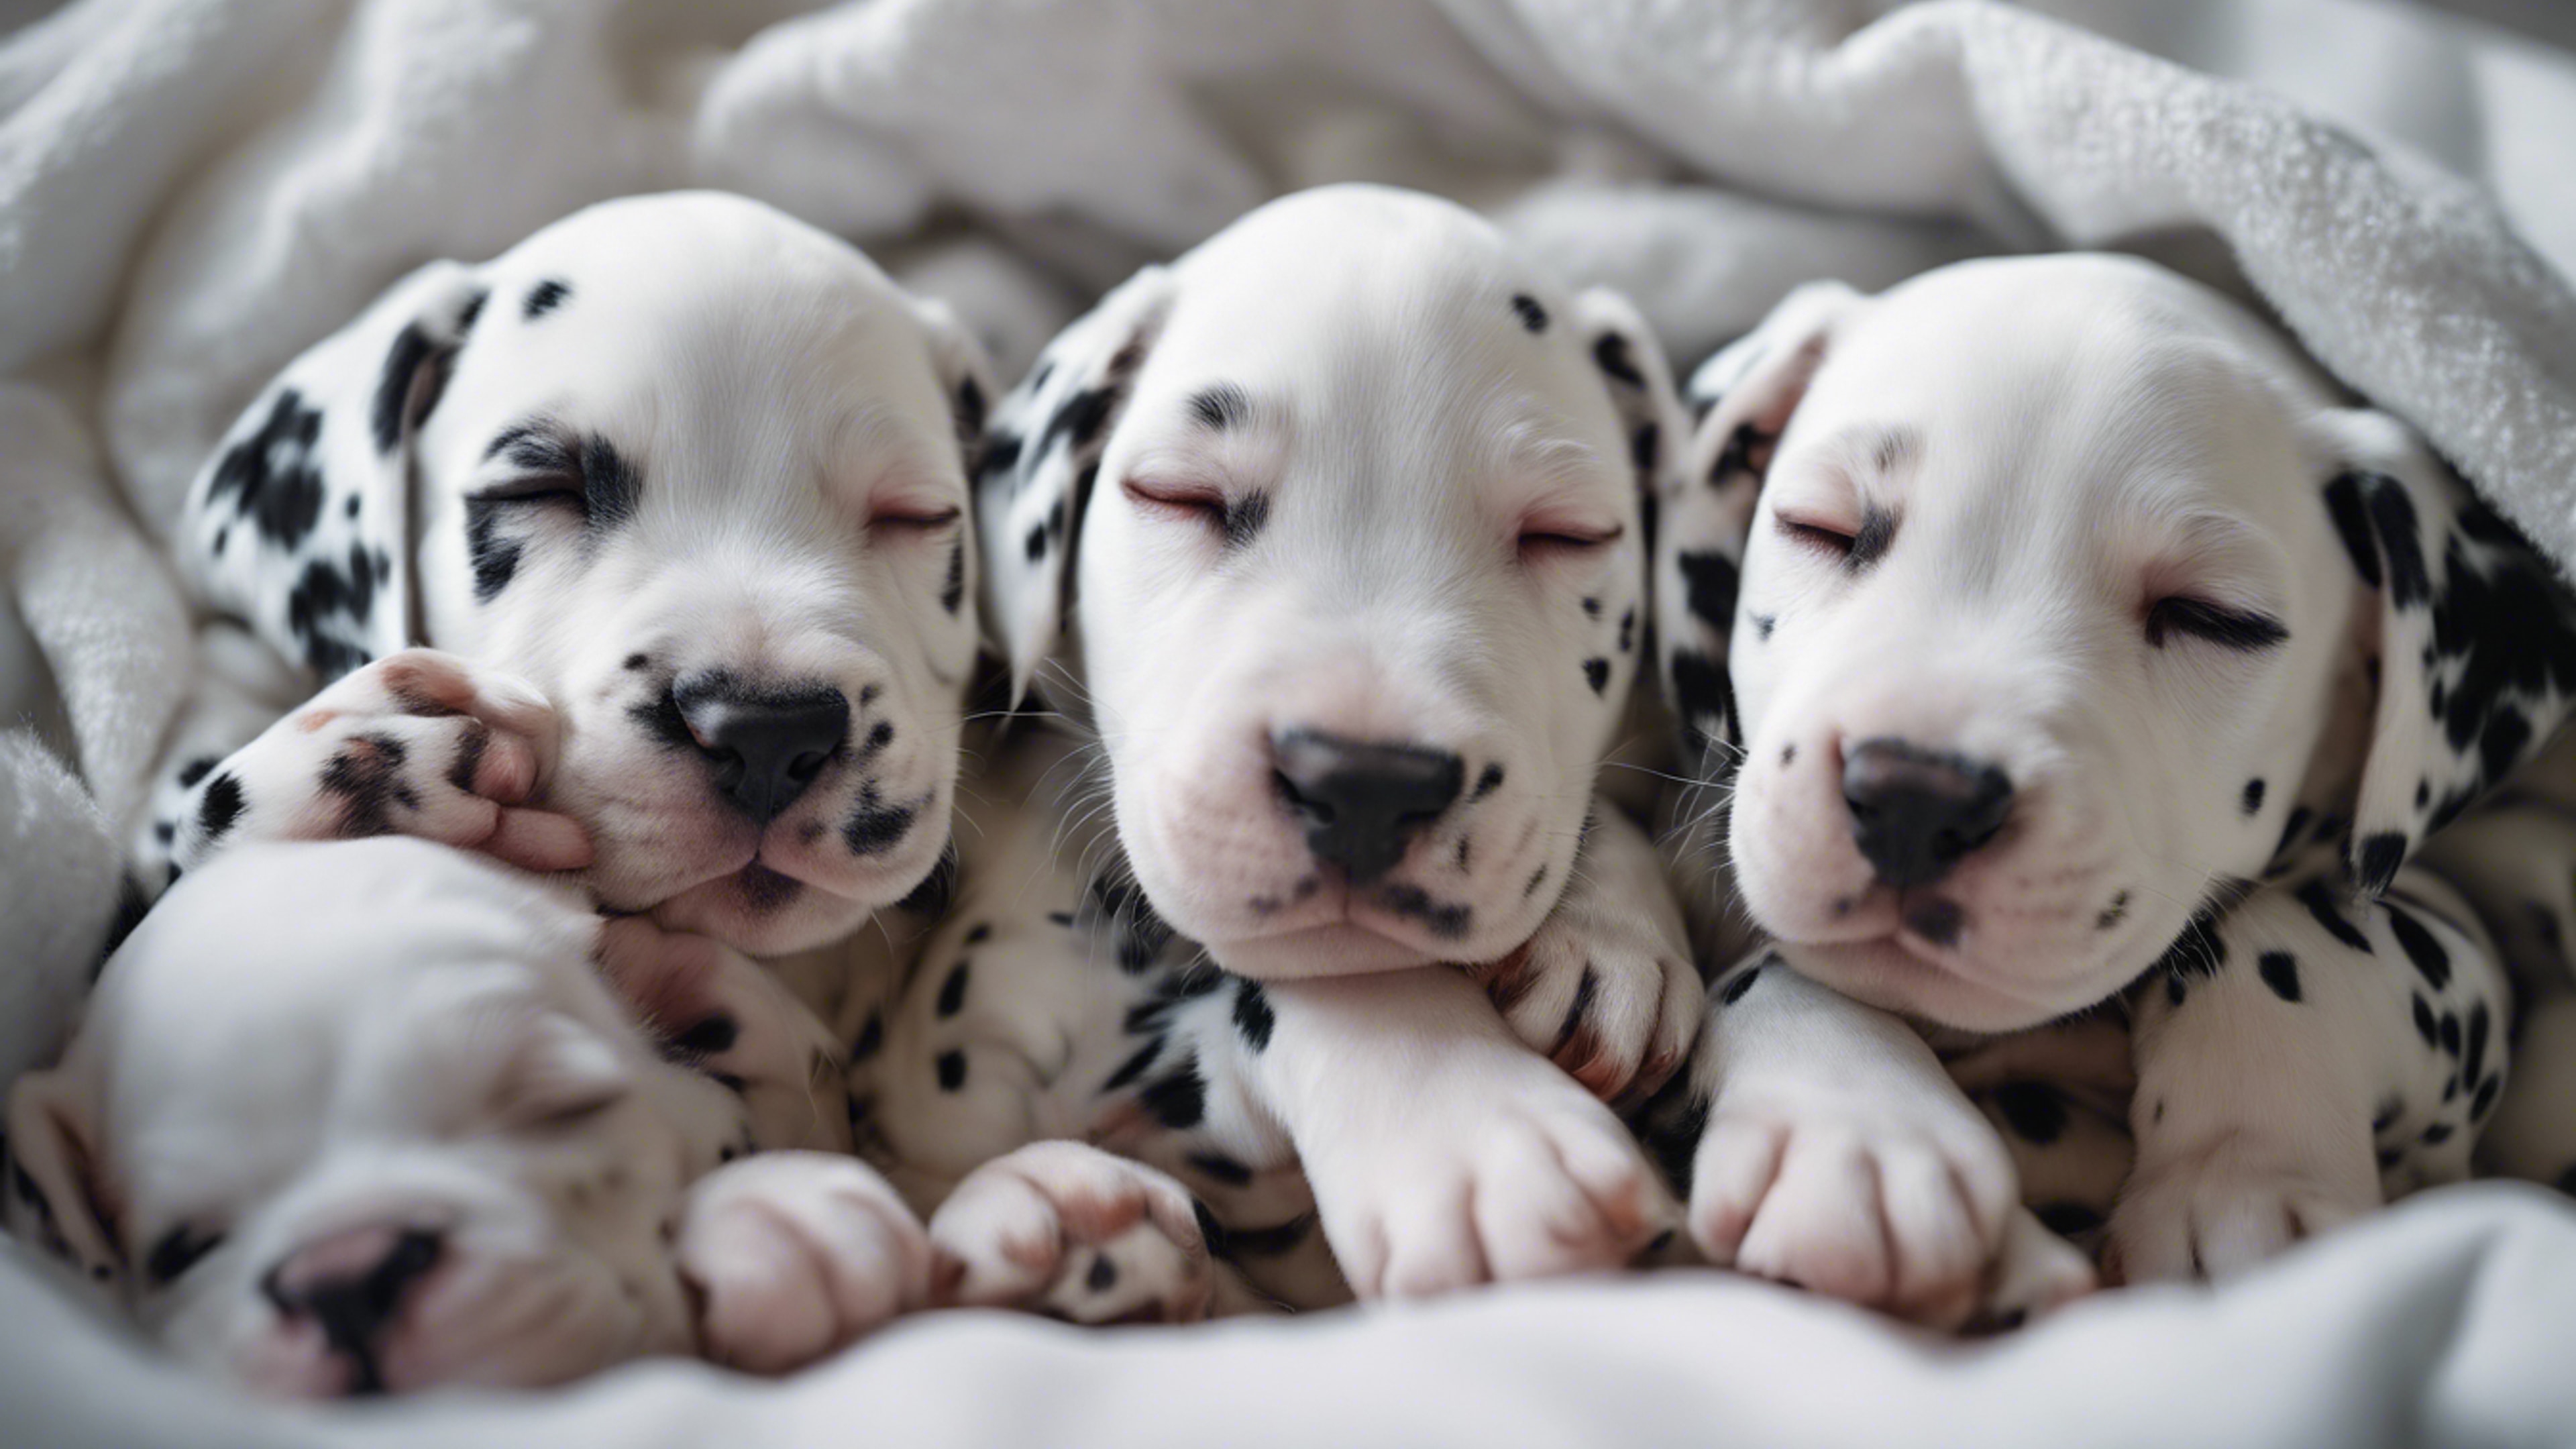 A cluster of sleeping Dalmatian puppies under a cozy white blanket in a nursery room. Fond d'écran[4a5dc312c1f344509ca9]